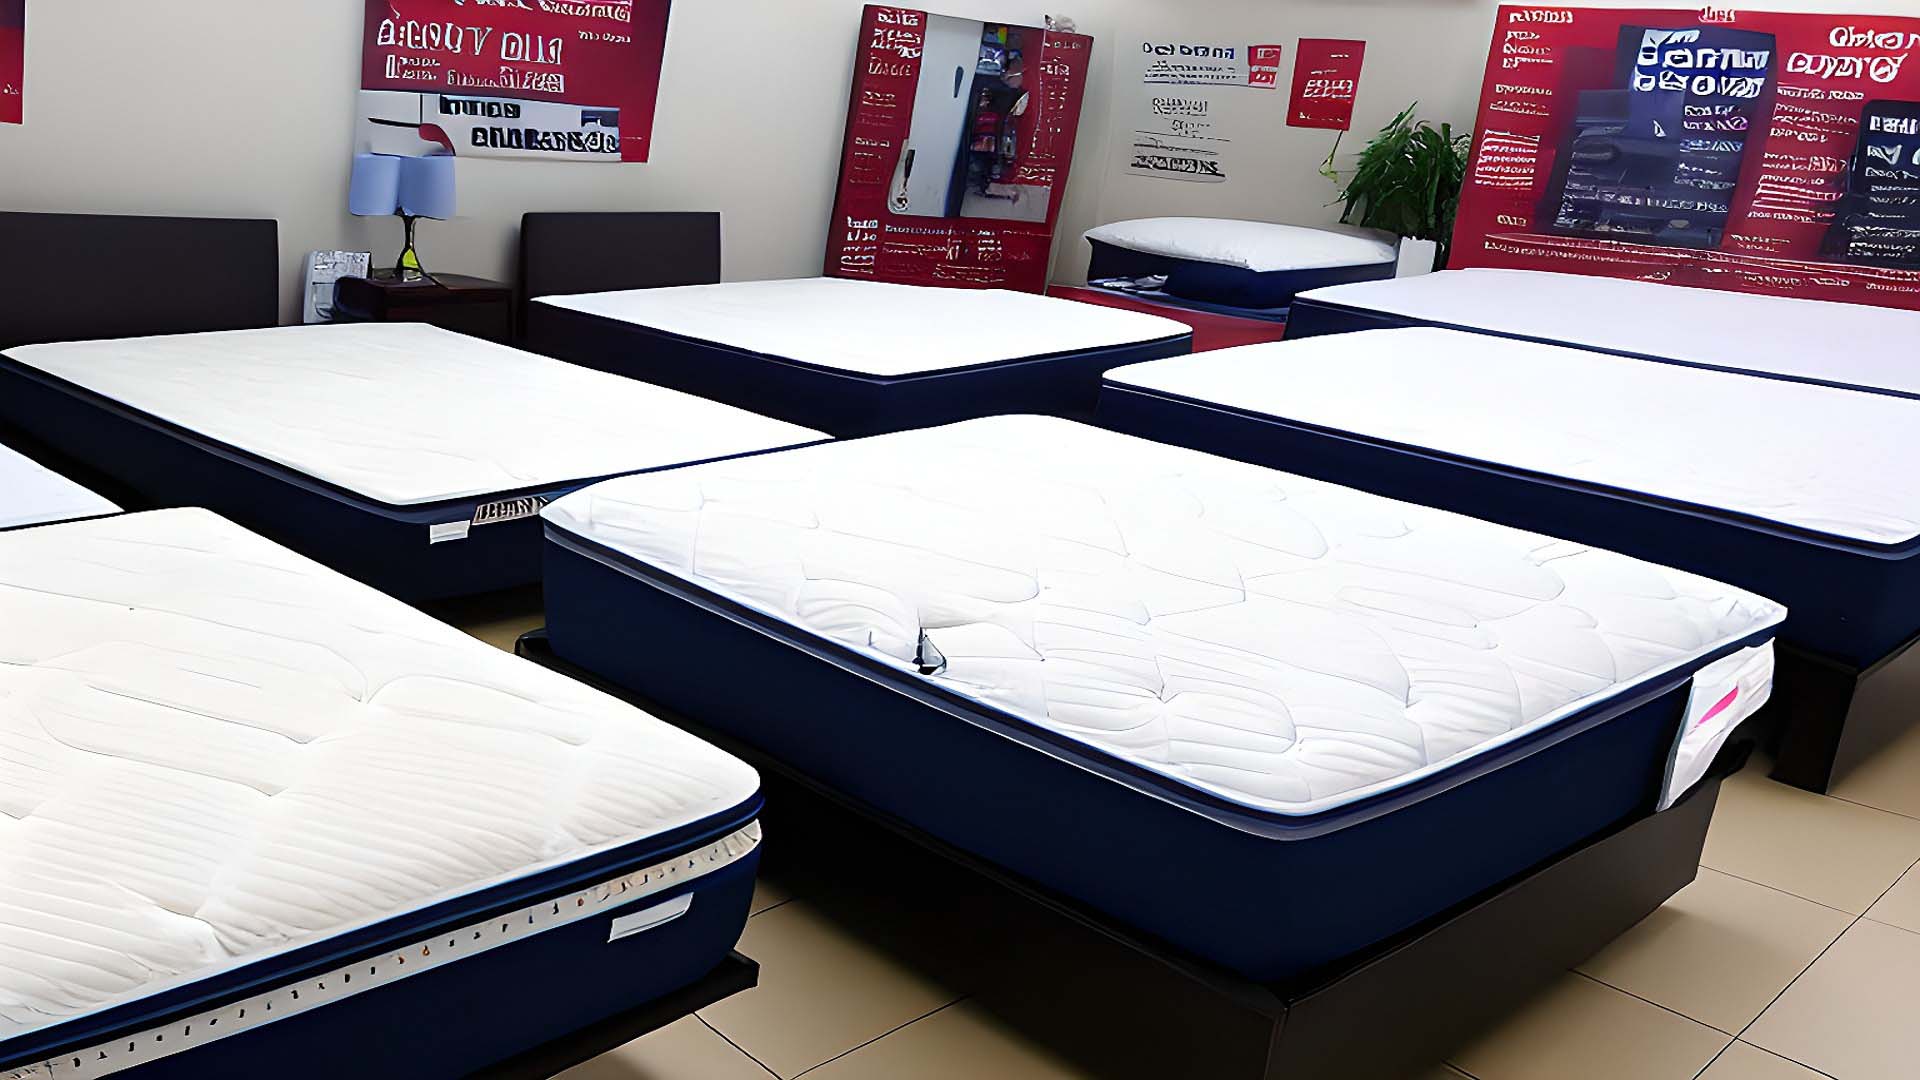 Mattress By Appointment in El Centro, California 92243